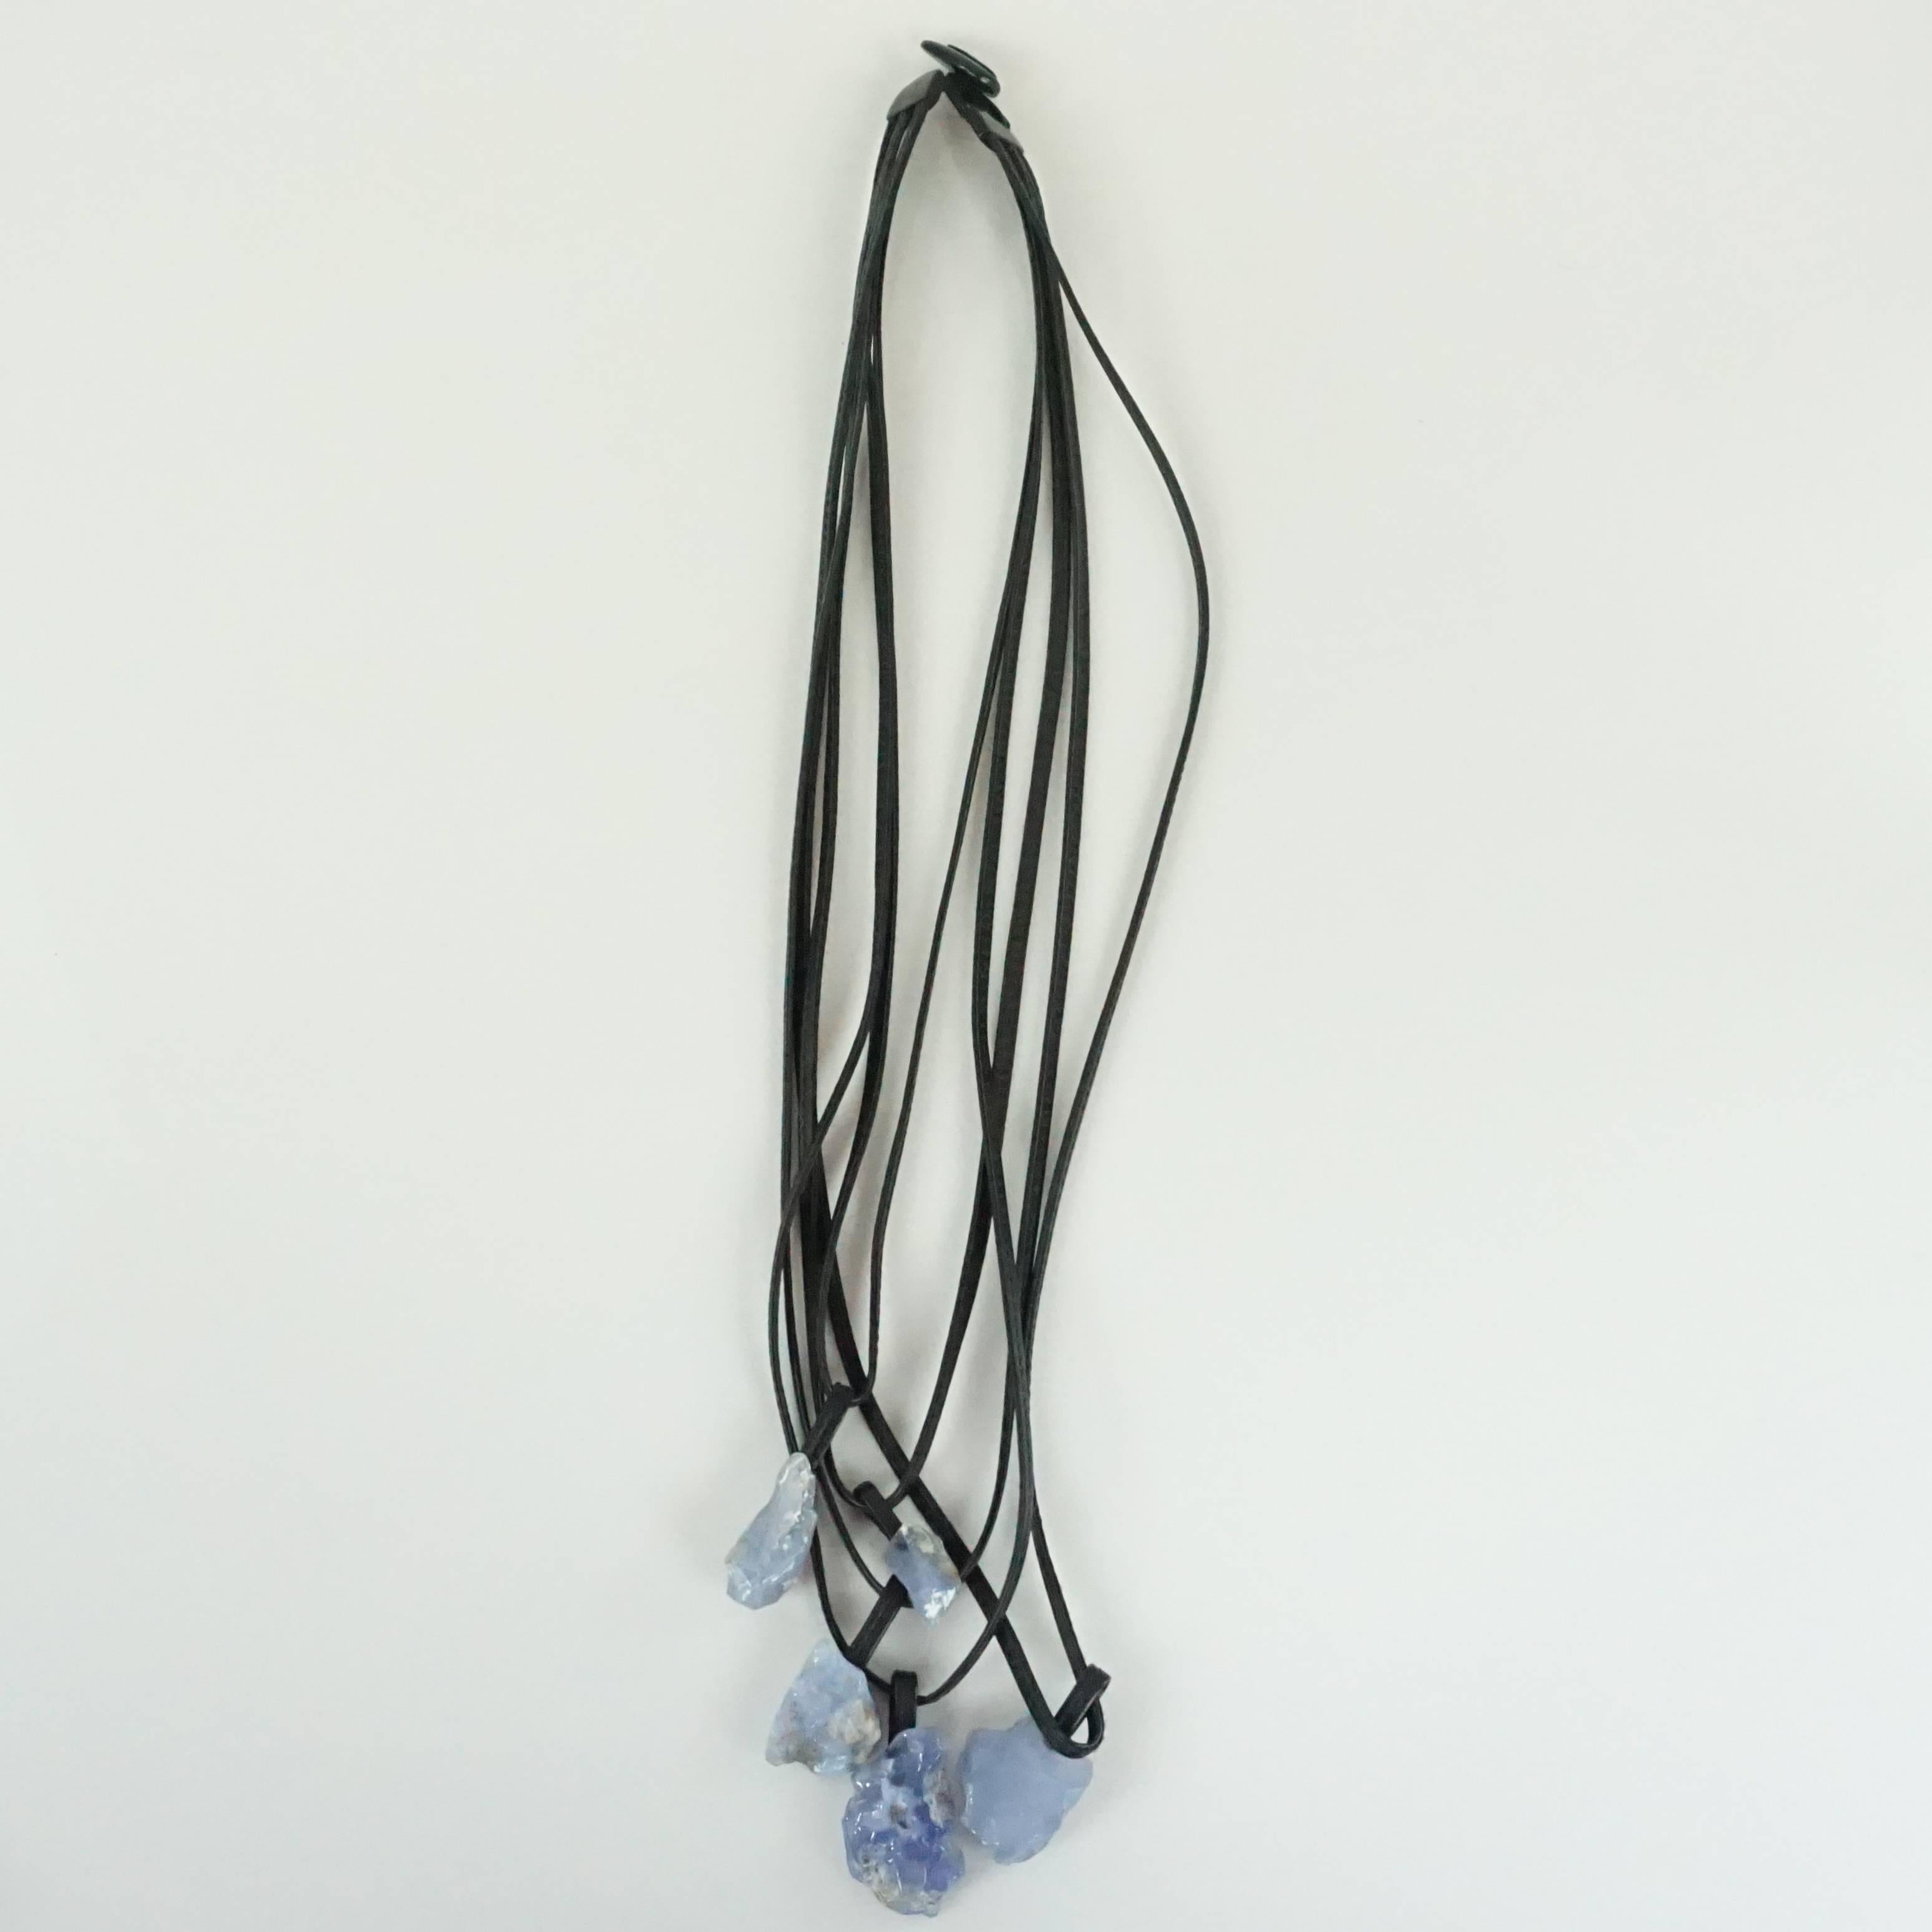 This Monies long necklace is composed of several leather cords with different lengths that have blue chalcedony stones at the end. The necklace is in excellent condition with minimal wear. There are also matching Chalcedony earrings available,